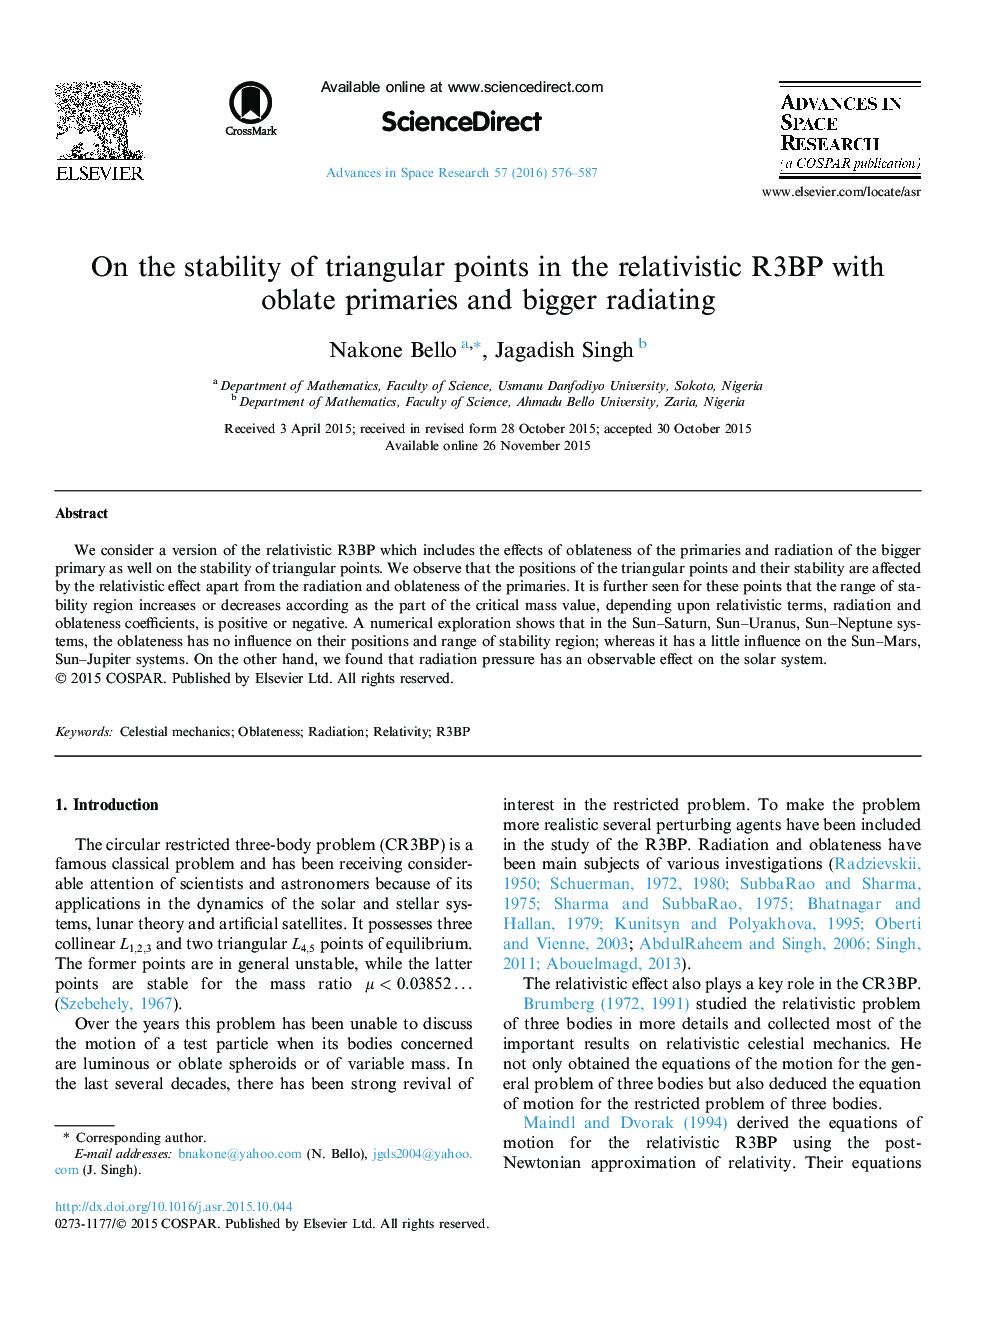 On the stability of triangular points in the relativistic R3BP with oblate primaries and bigger radiating